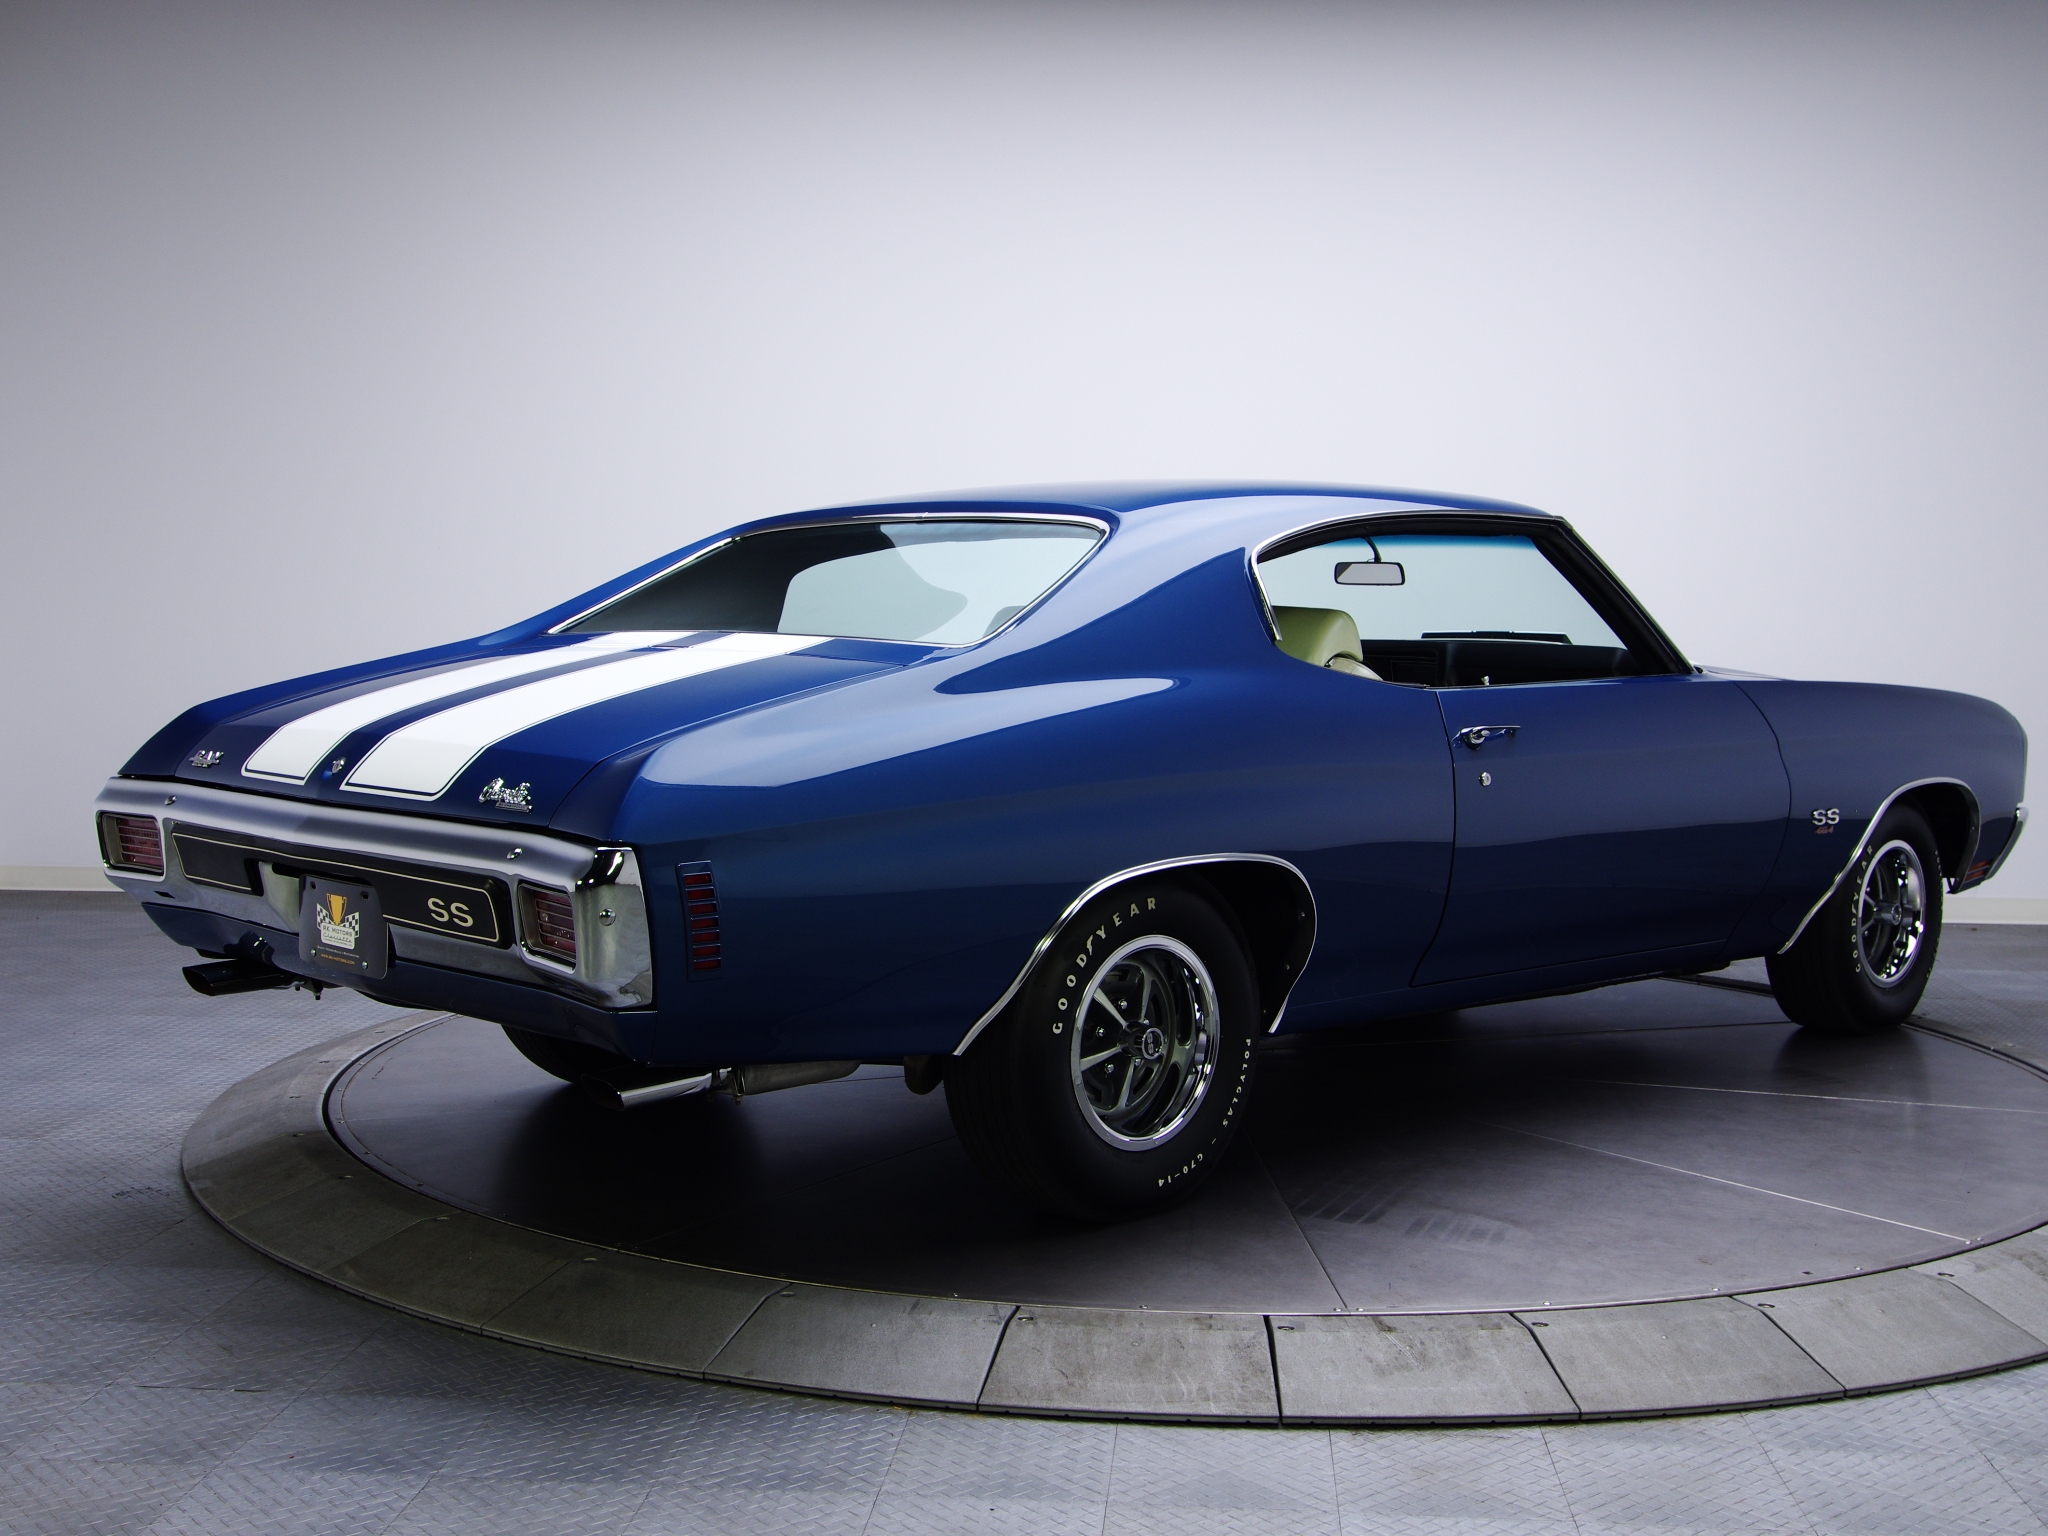 Chevrolet Chevelle Ss Ls6 Hardtop Coupe Cars